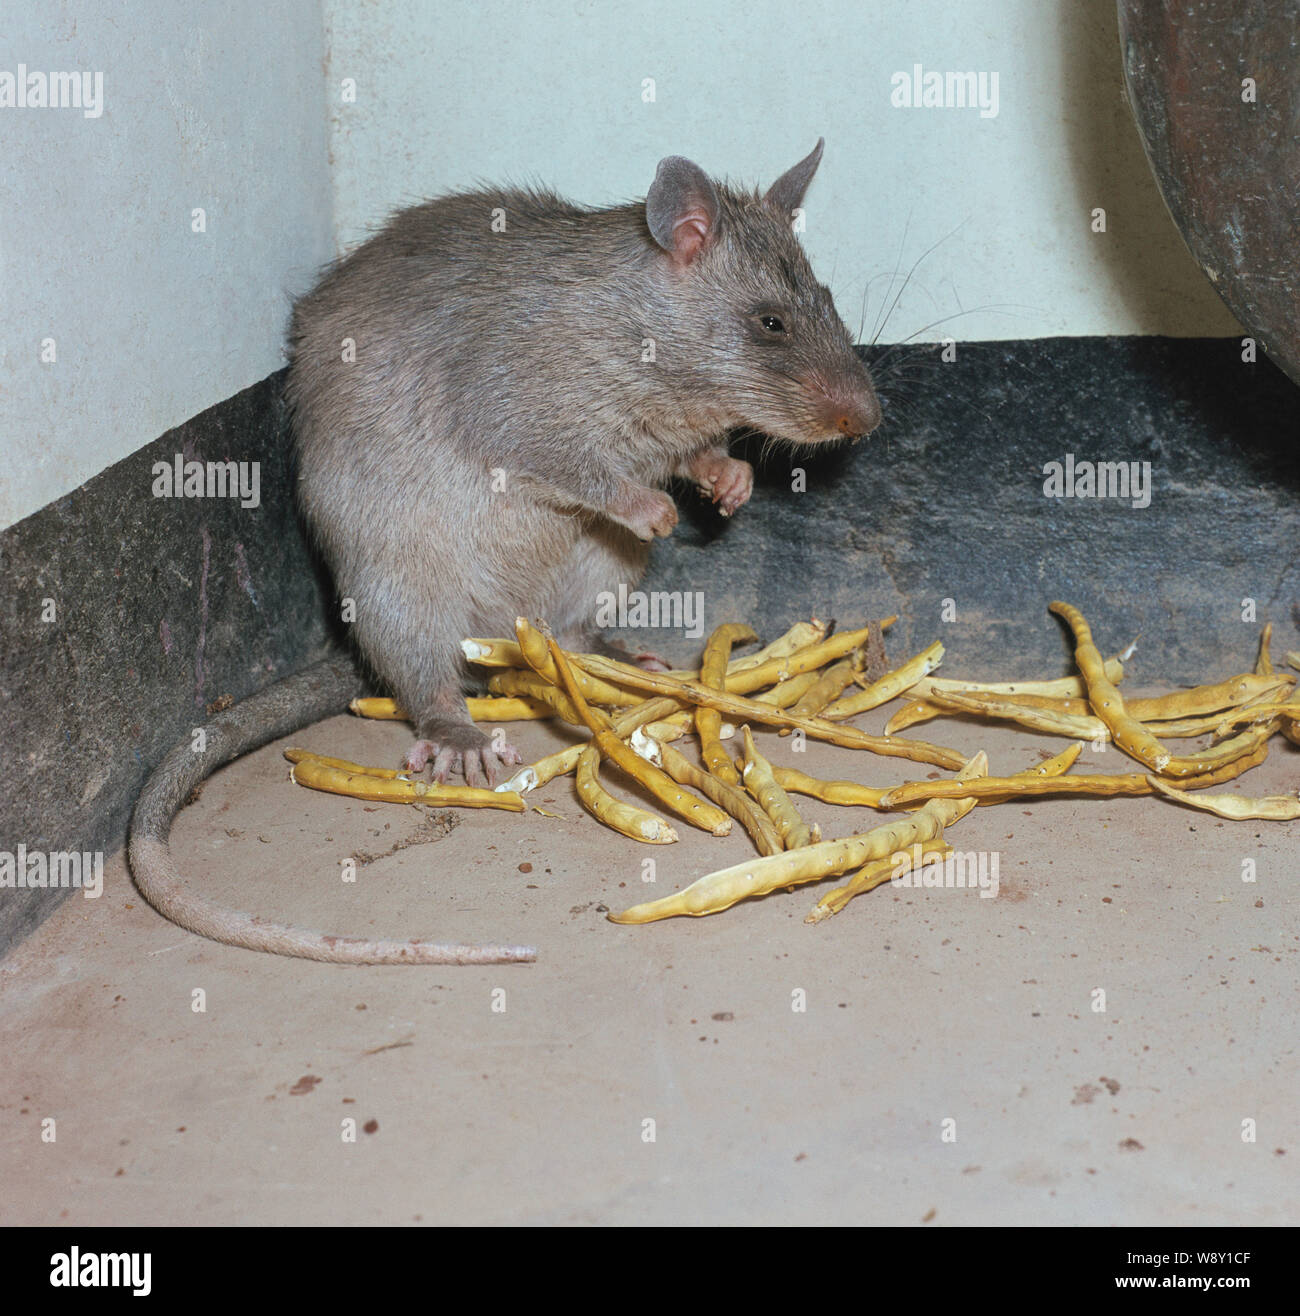 GAMBIAN GIANT POUCHED RAT (Cricetomys gambianus). Photographed in Nigeria. Kept and bred as a food source in some African countries. Stock Photo